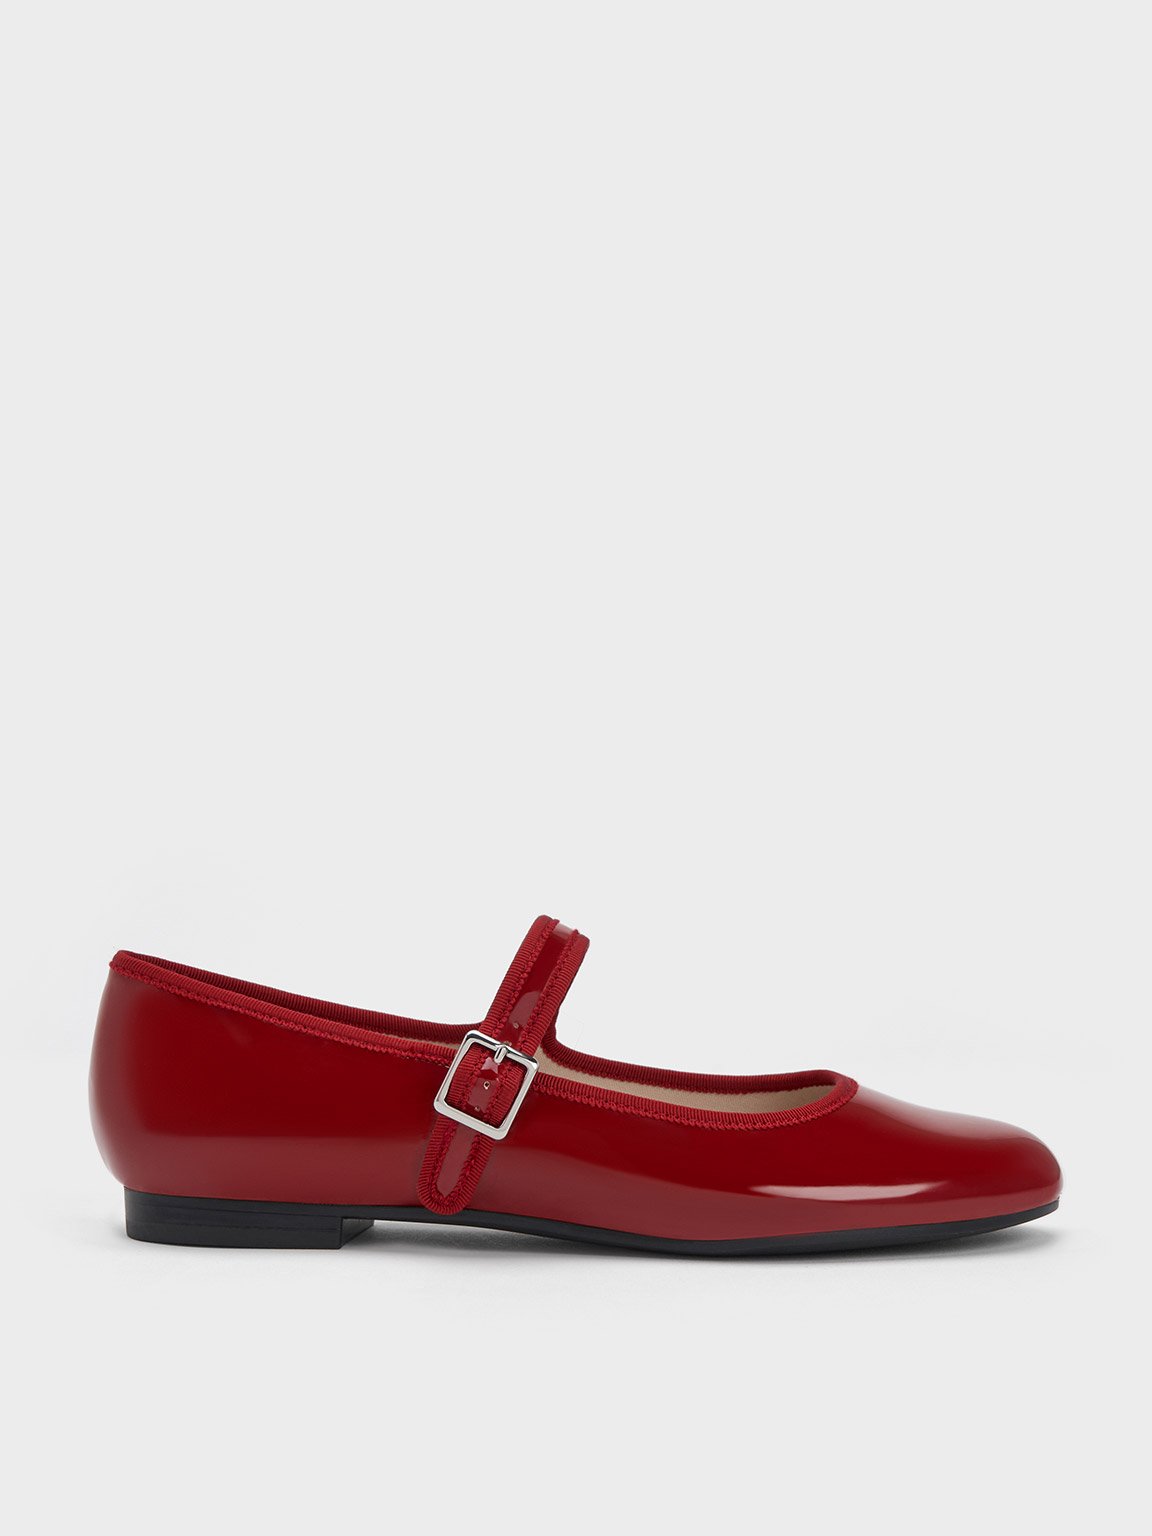 Charles & Keith Patent Buckled Mary Jane Flats In Red